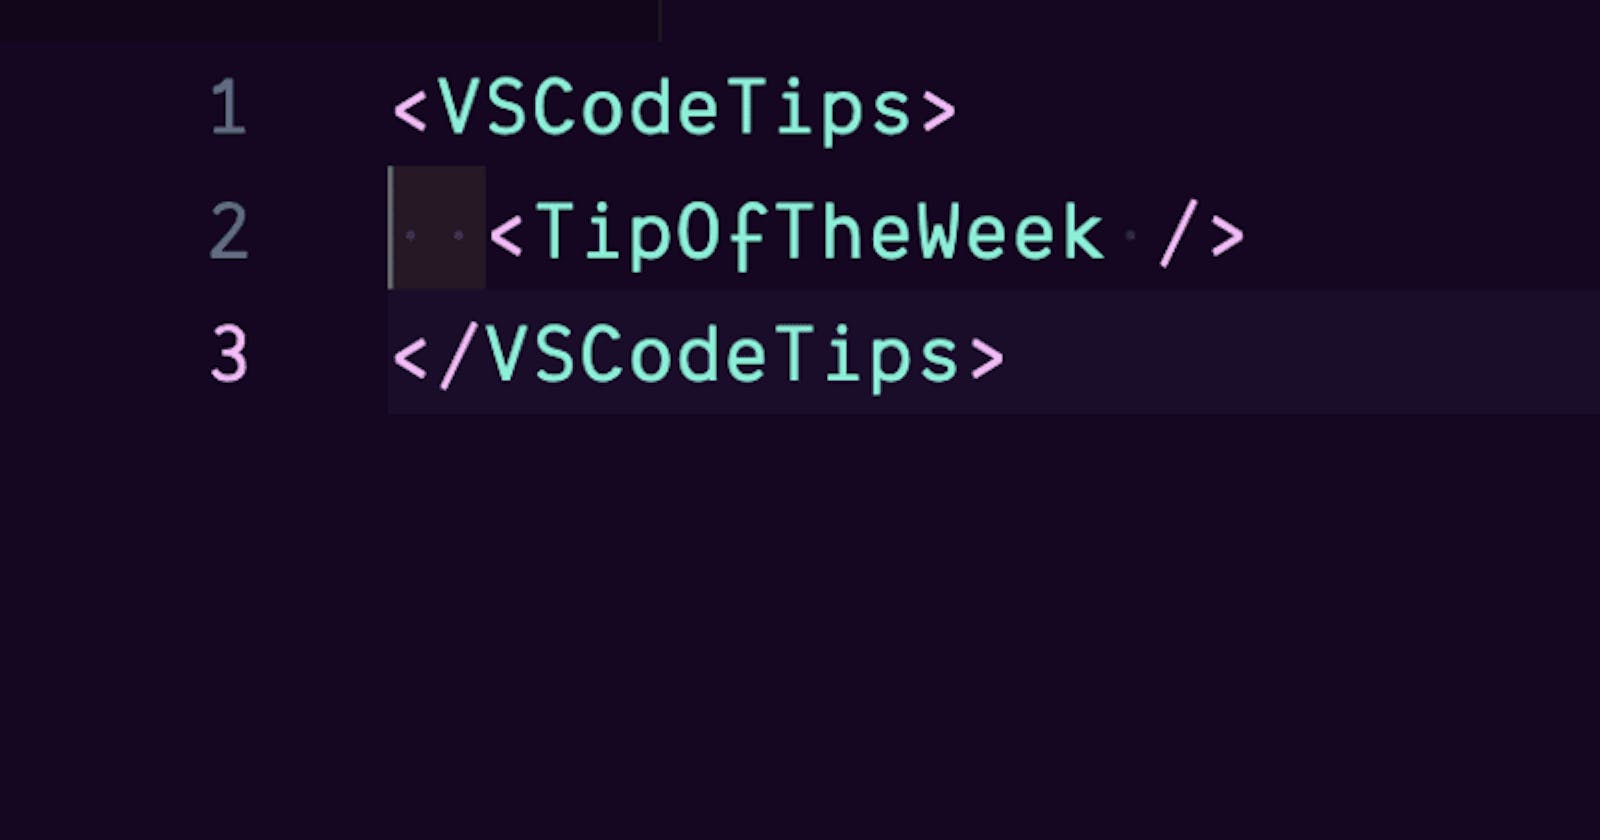 VS Code Tip of the Week: Inlay hints configuration options